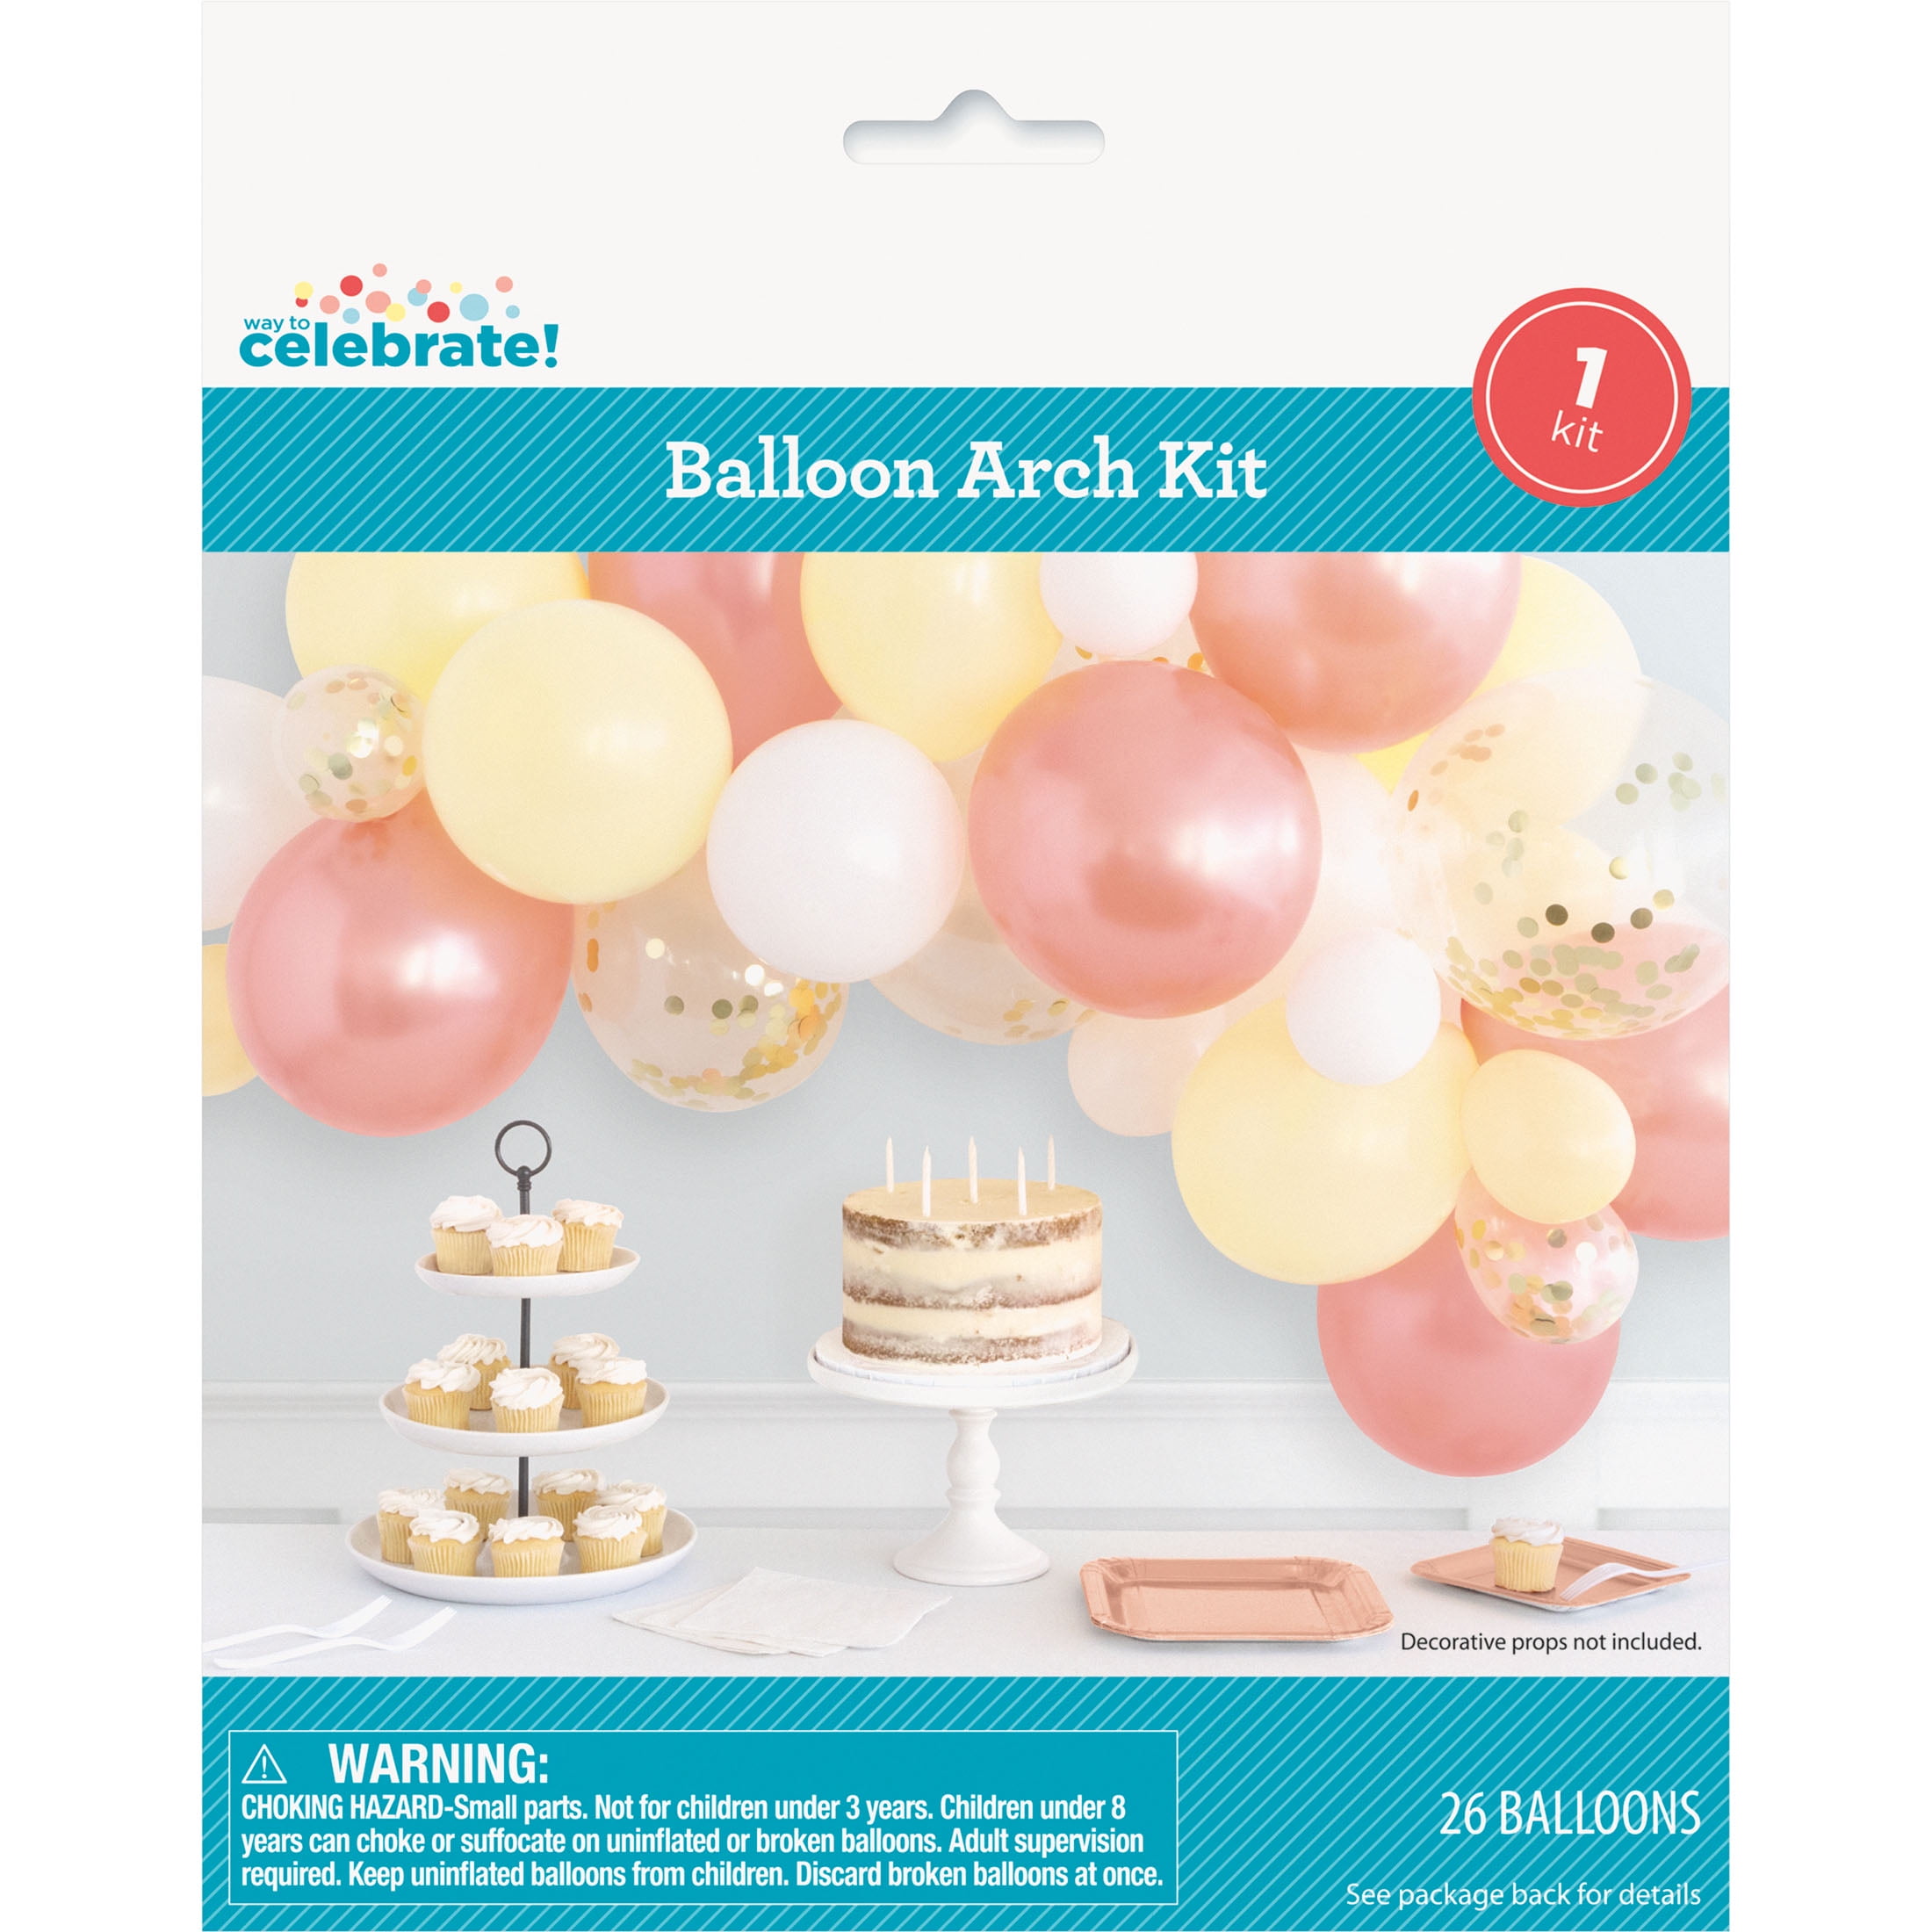 Way to Celebrate! Confetti & Latex Party Balloon Arch Kit, Rose Gold